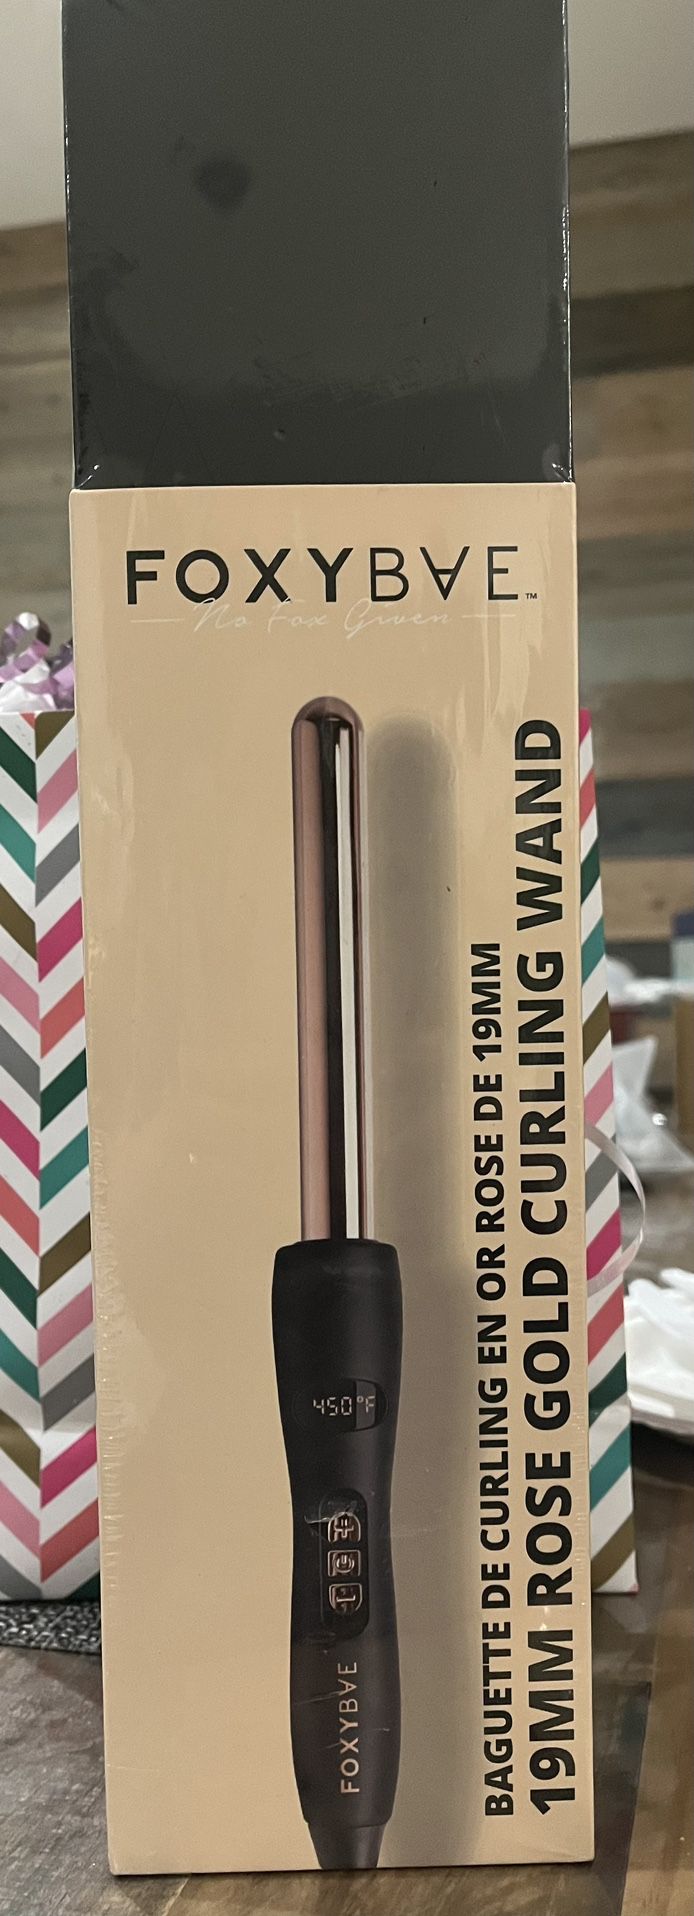 FoxyBae 19mm Rose Gold Curling Wand for Sale in La Mirada, CA - OfferUp